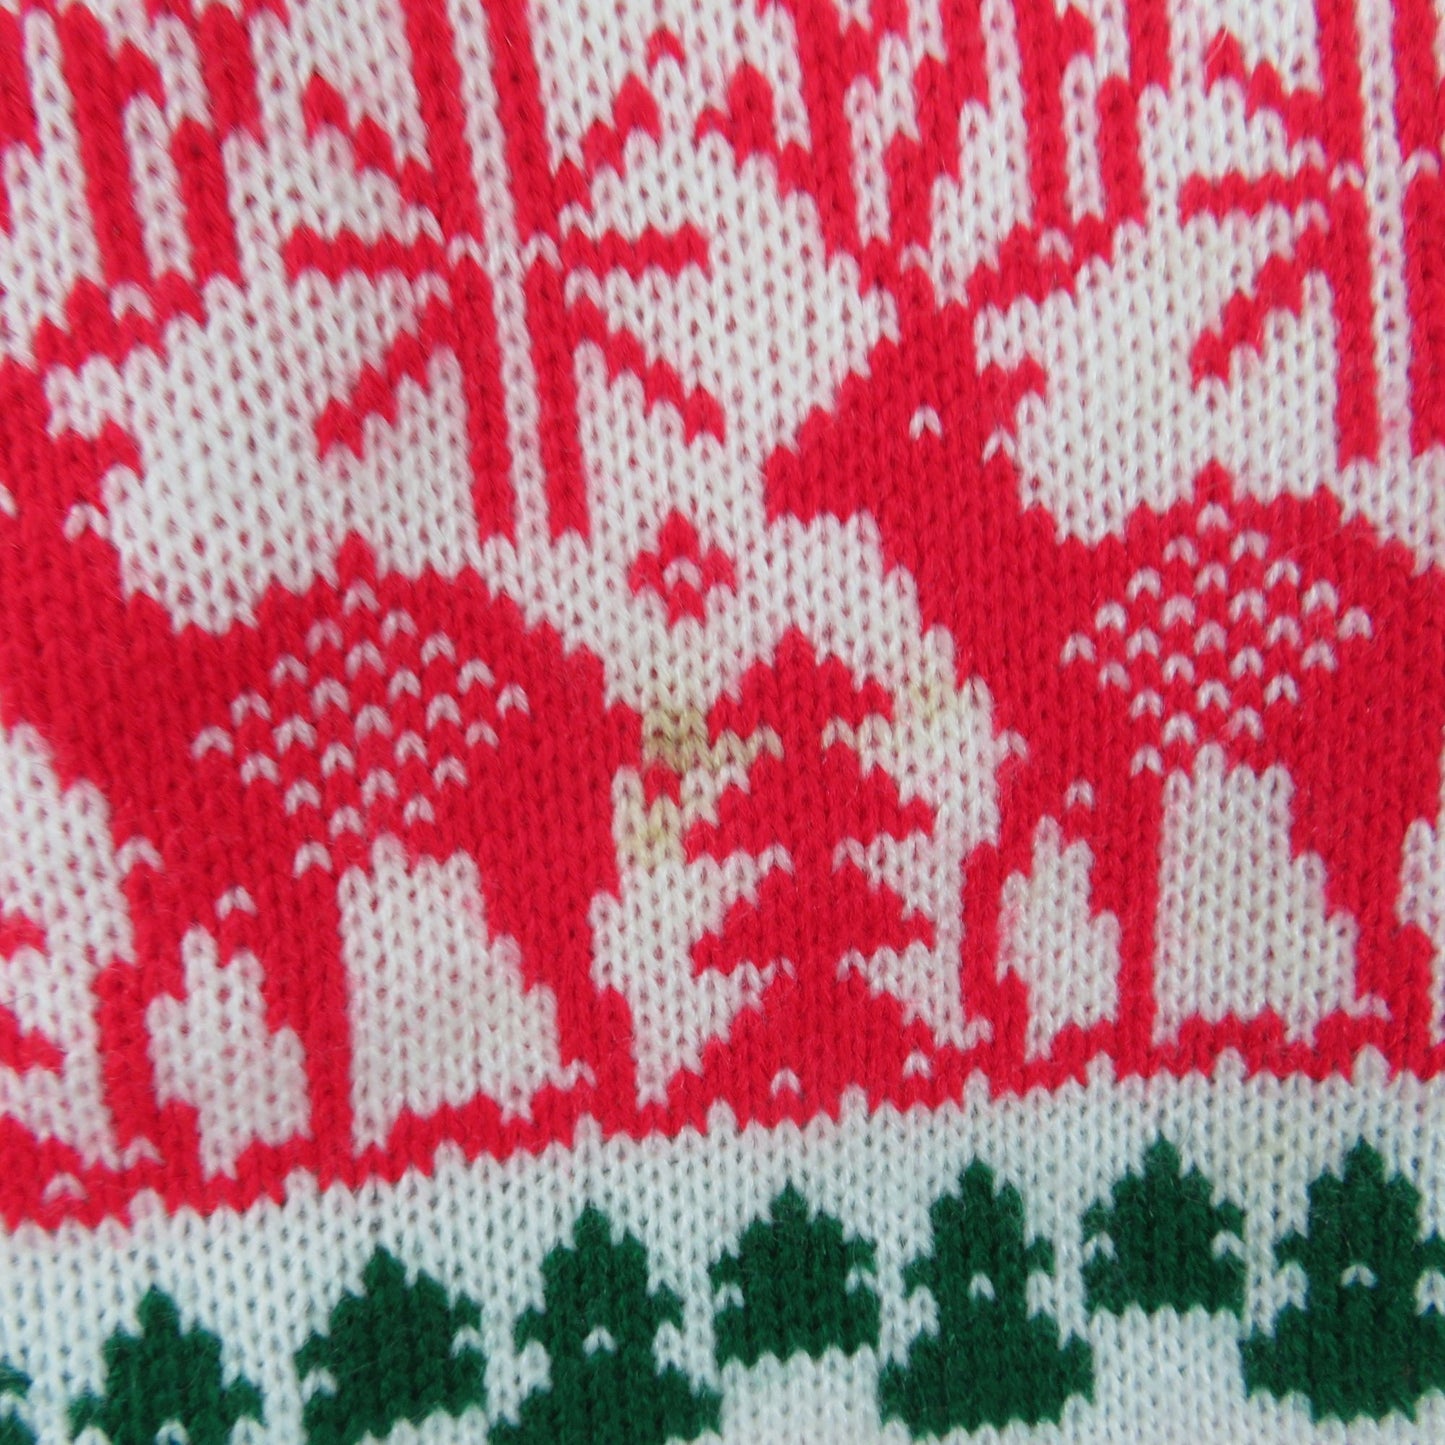 Reindeer Knit Christmas Stocking Knitted White Red Green 1980s Vintage Extra Long